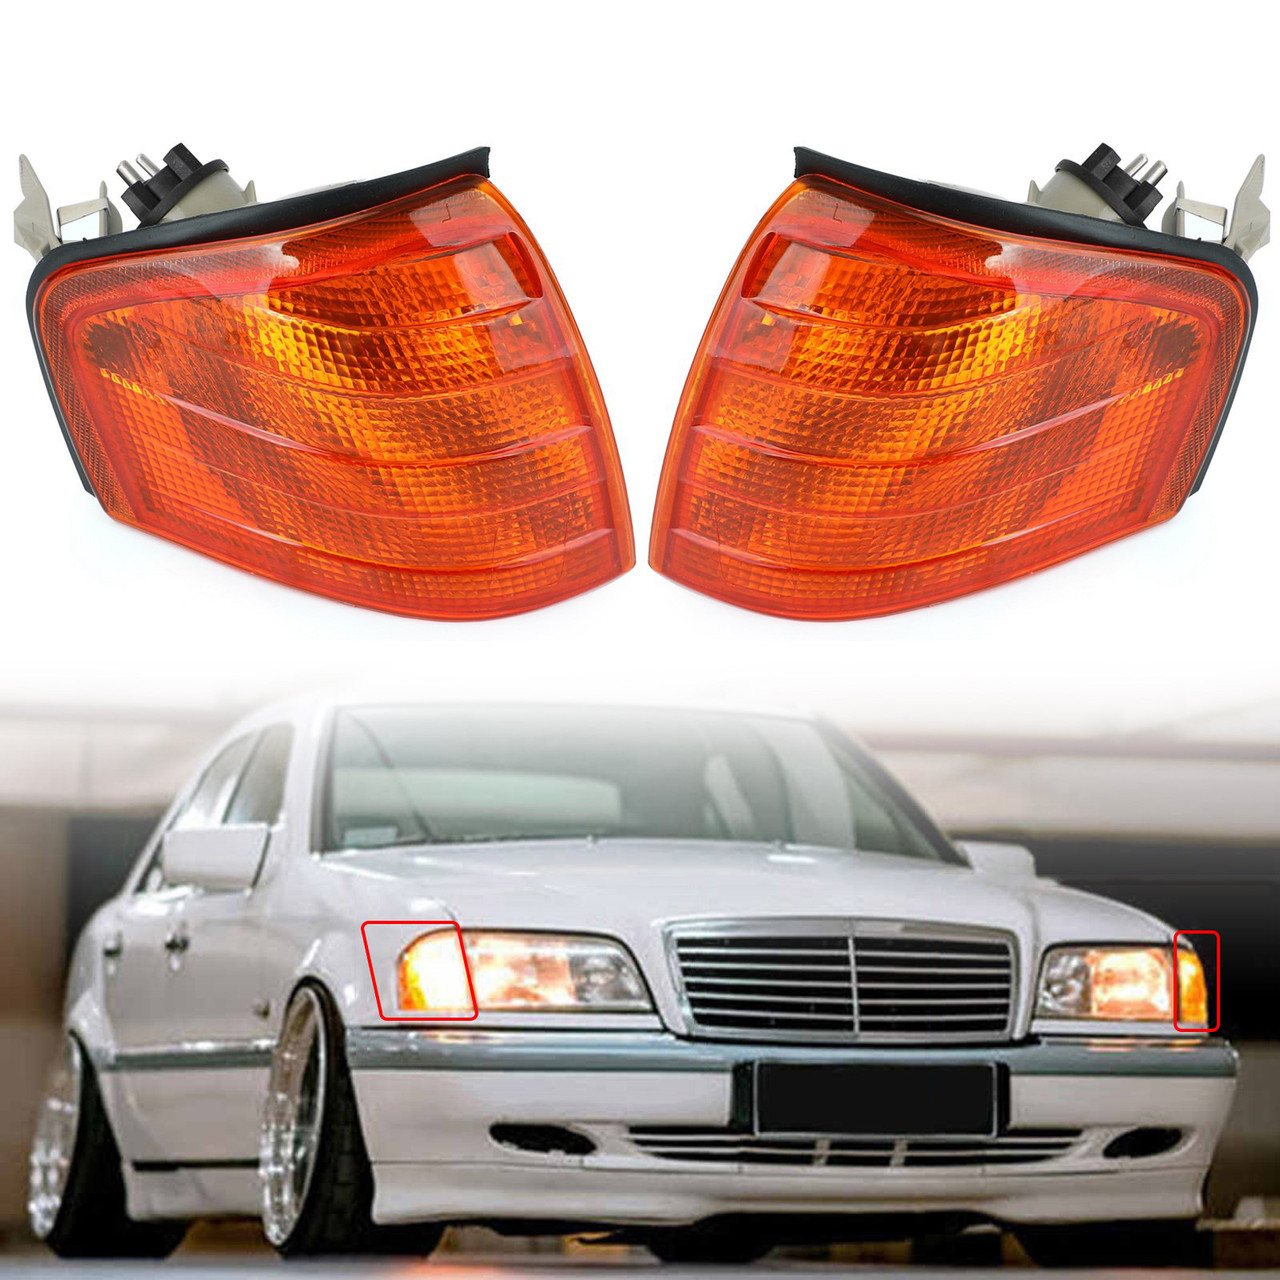 Pair Corner Lights Turn Signal Lamps Fits For Mercedes Benz C Class W202 1994-2000 Yellow